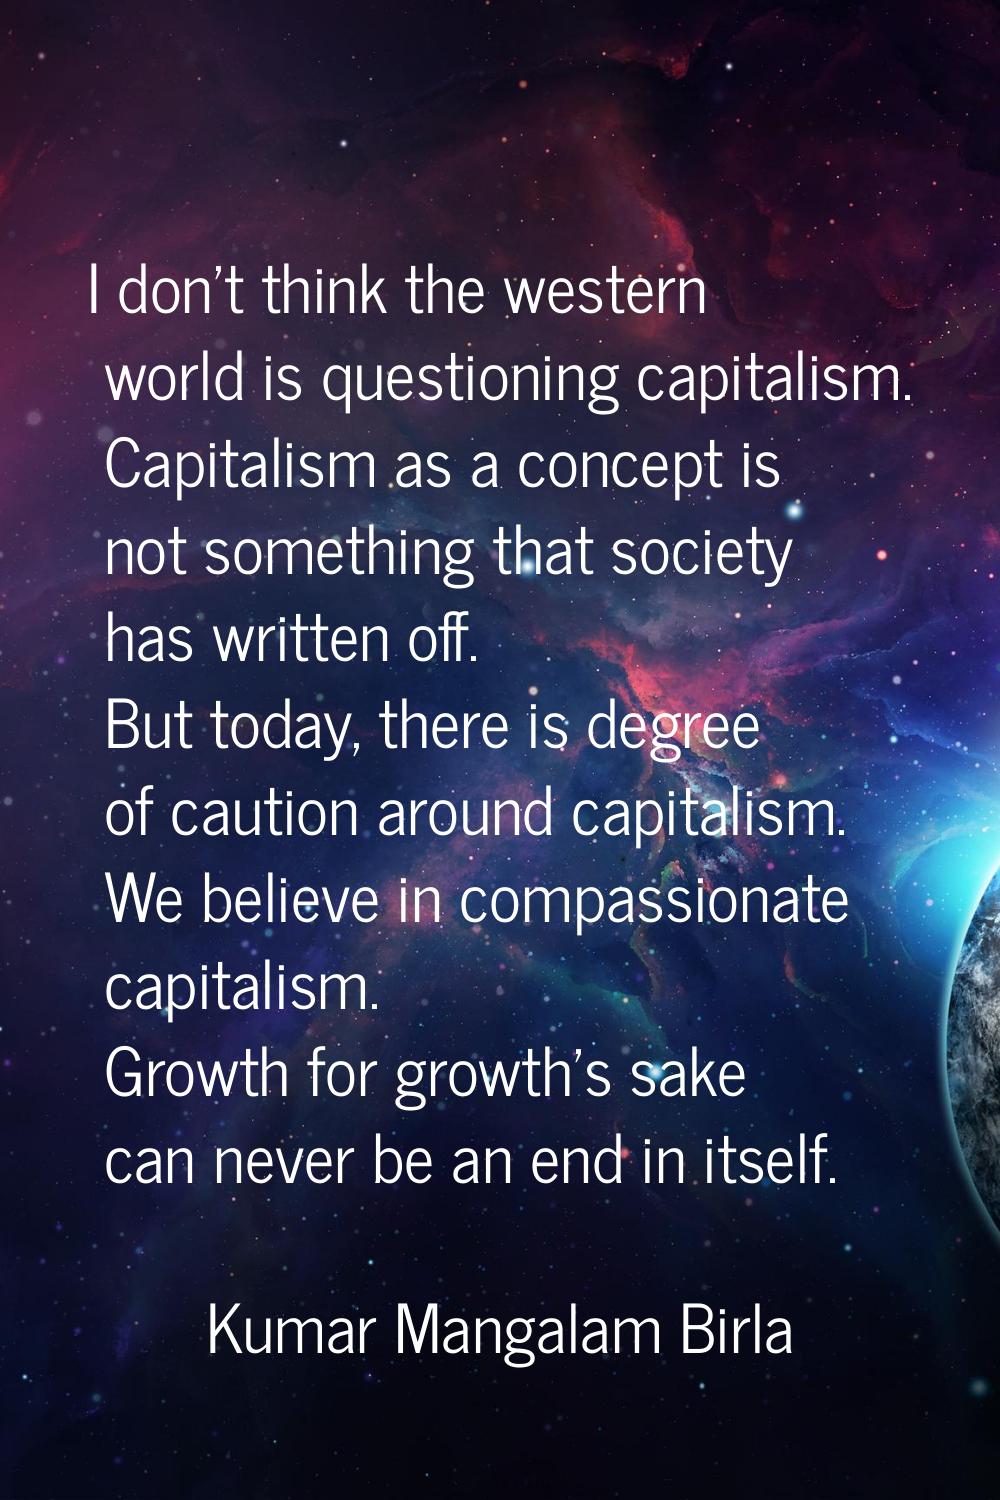 I don't think the western world is questioning capitalism. Capitalism as a concept is not something